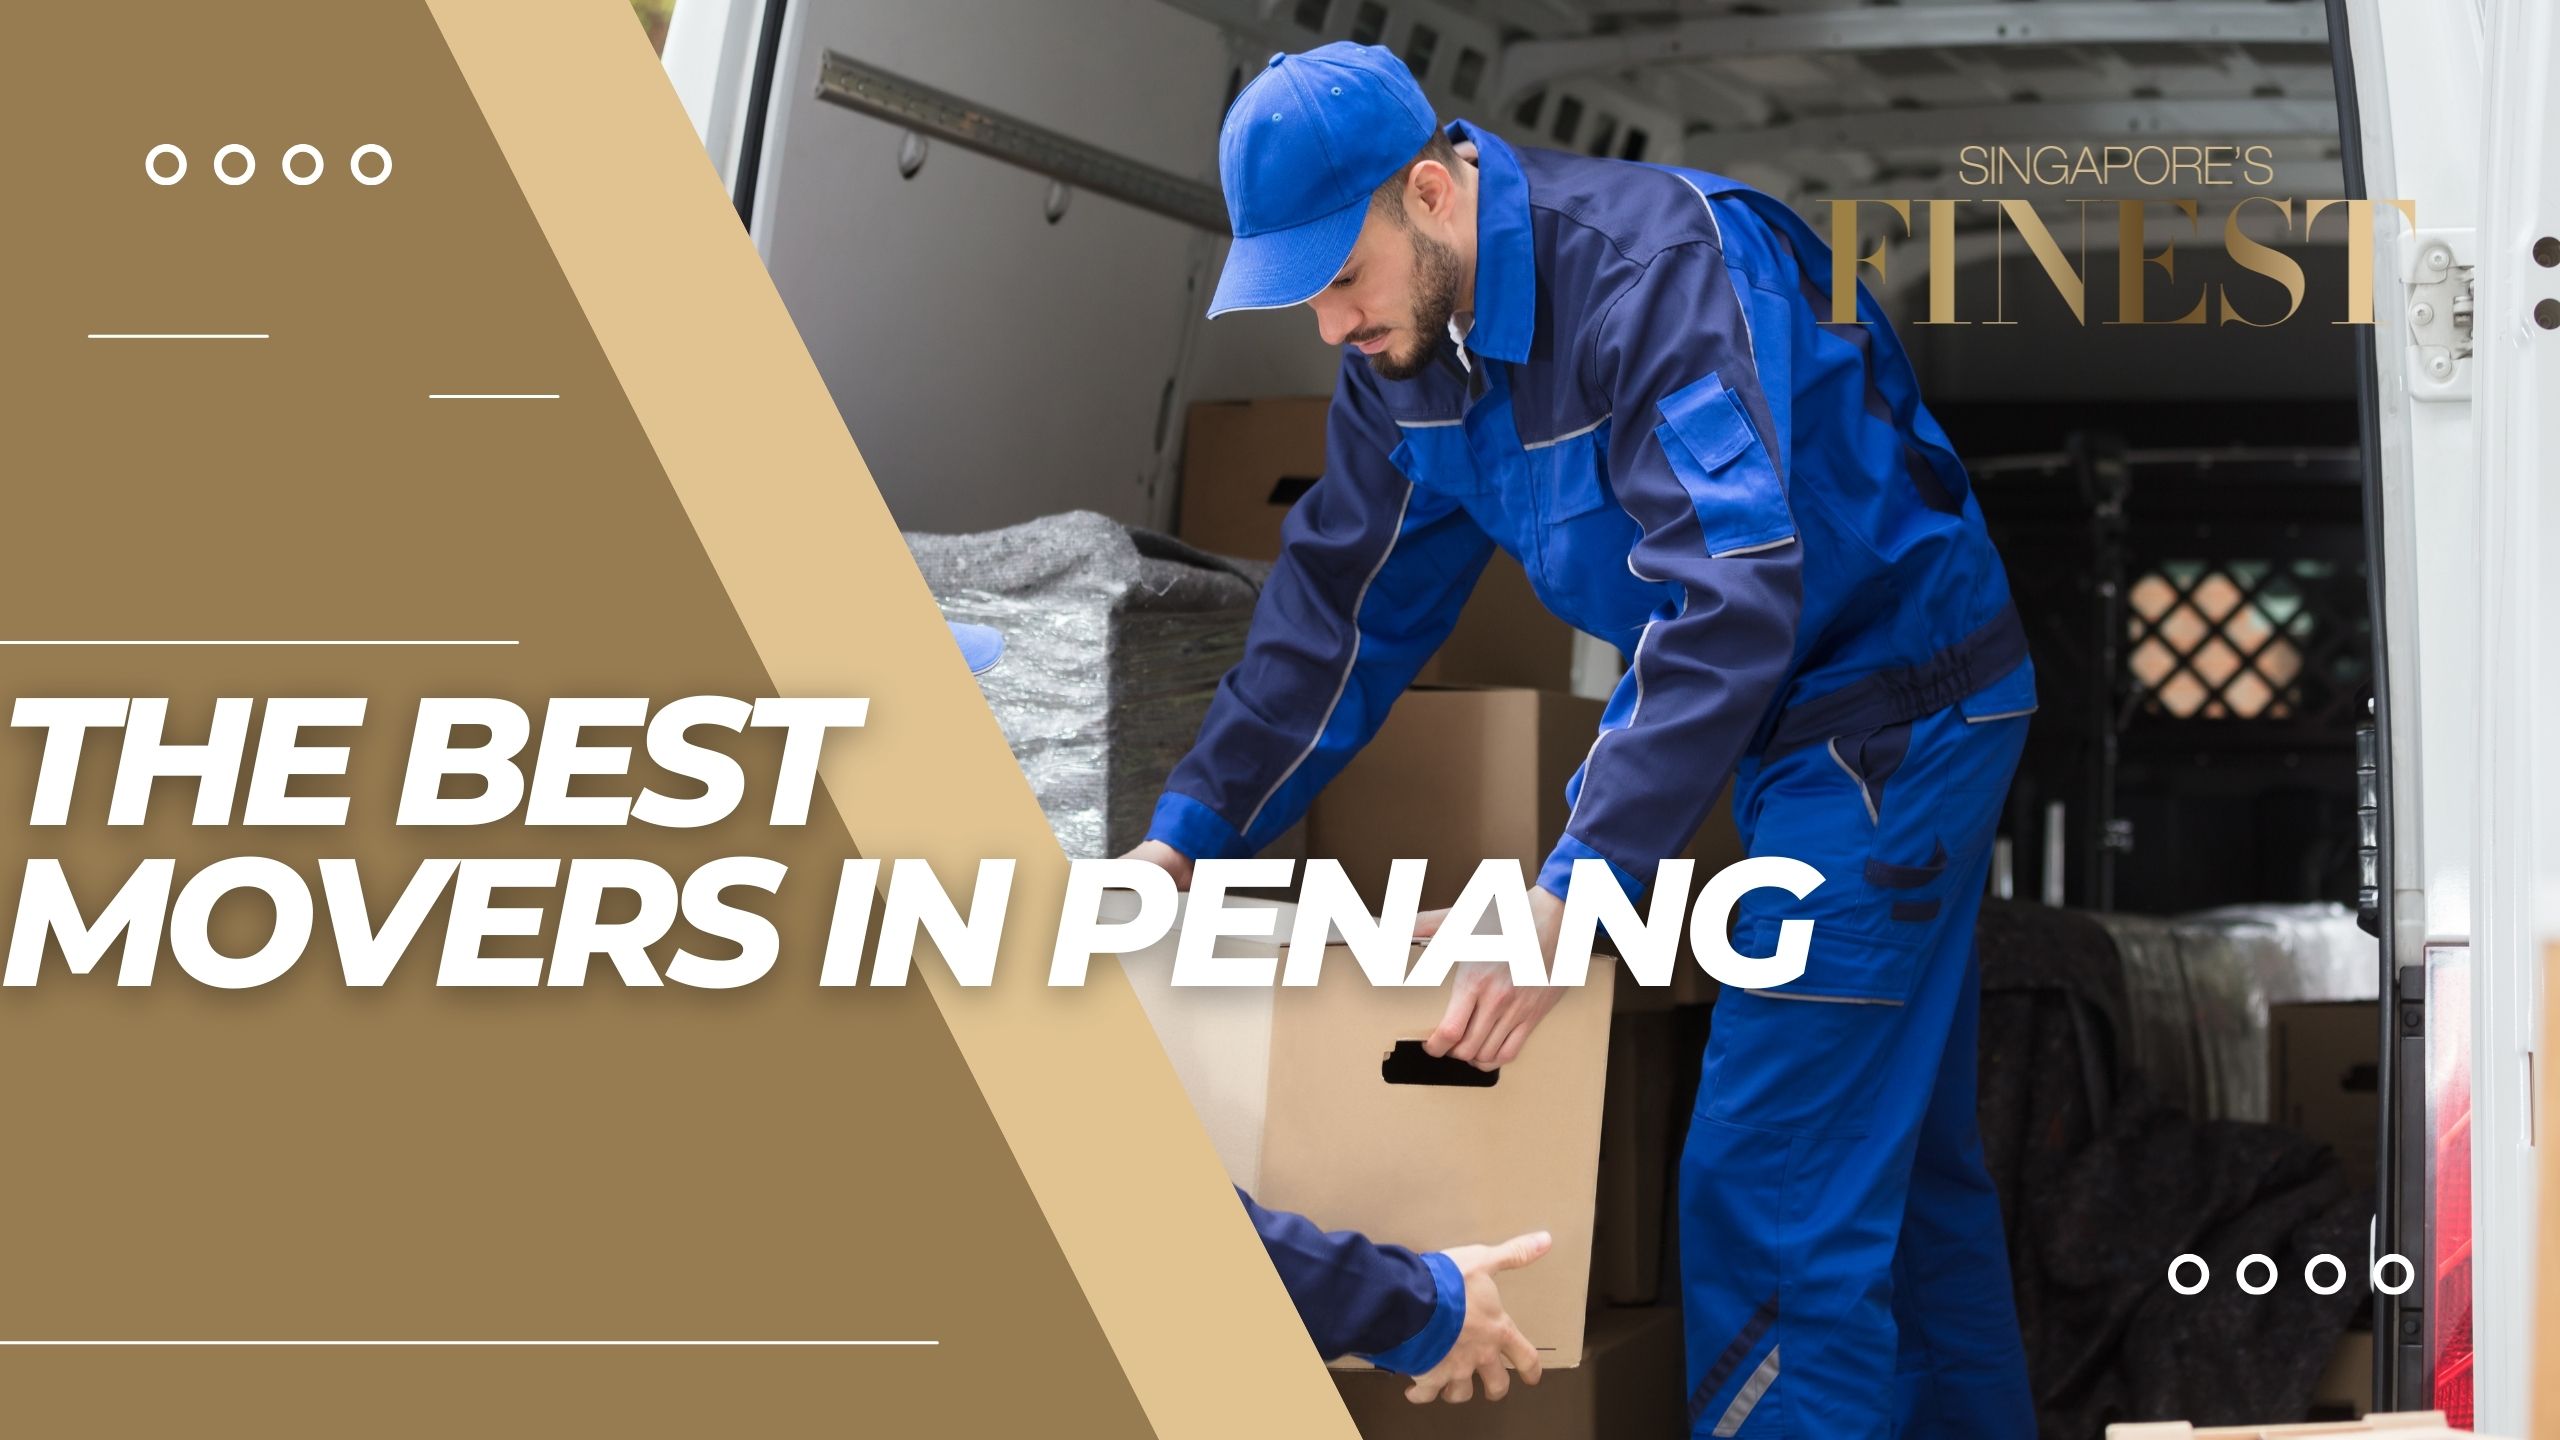 The Finest Movers in Penang